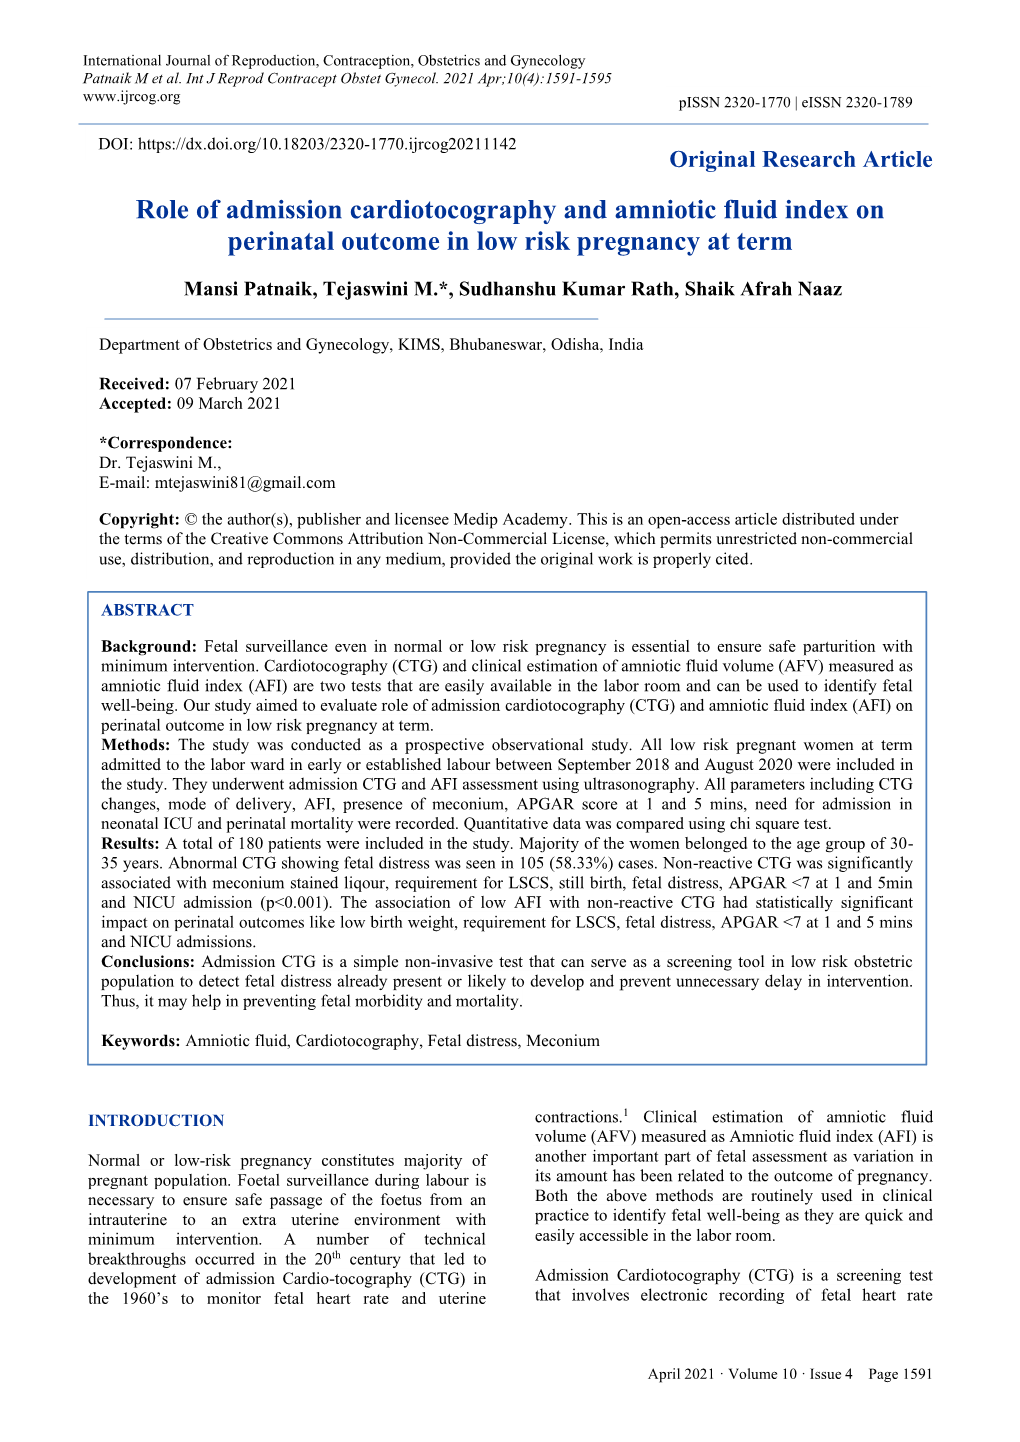 Role of Admission Cardiotocography and Amniotic Fluid Index on Perinatal Outcome in Low Risk Pregnancy at Term